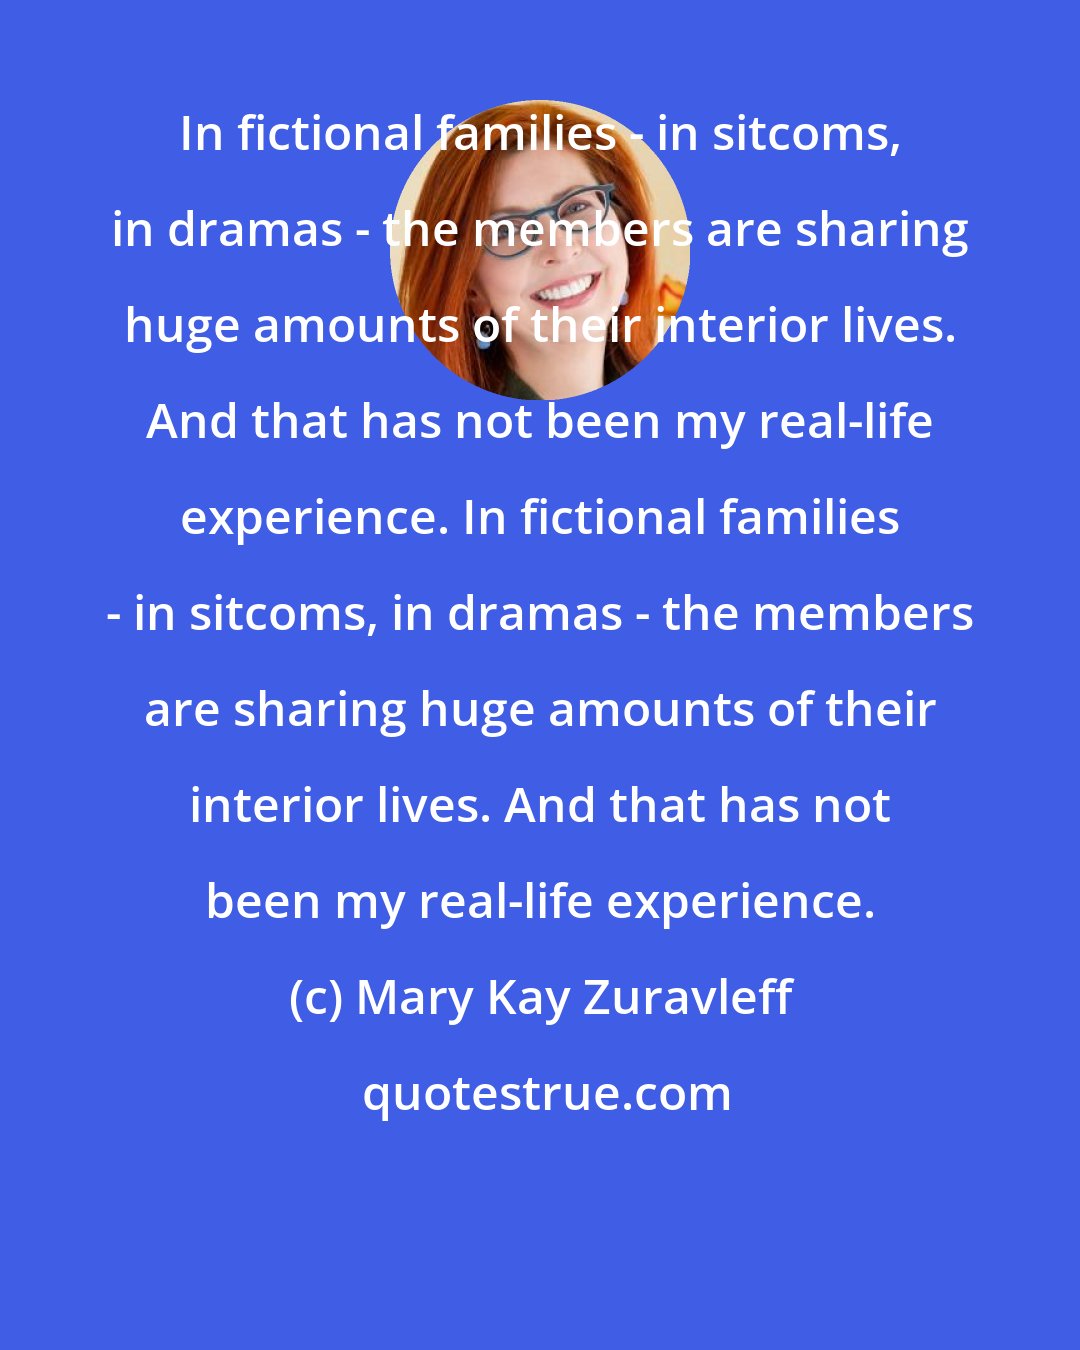 Mary Kay Zuravleff: In fictional families - in sitcoms, in dramas - the members are sharing huge amounts of their interior lives. And that has not been my real-life experience. In fictional families - in sitcoms, in dramas - the members are sharing huge amounts of their interior lives. And that has not been my real-life experience.